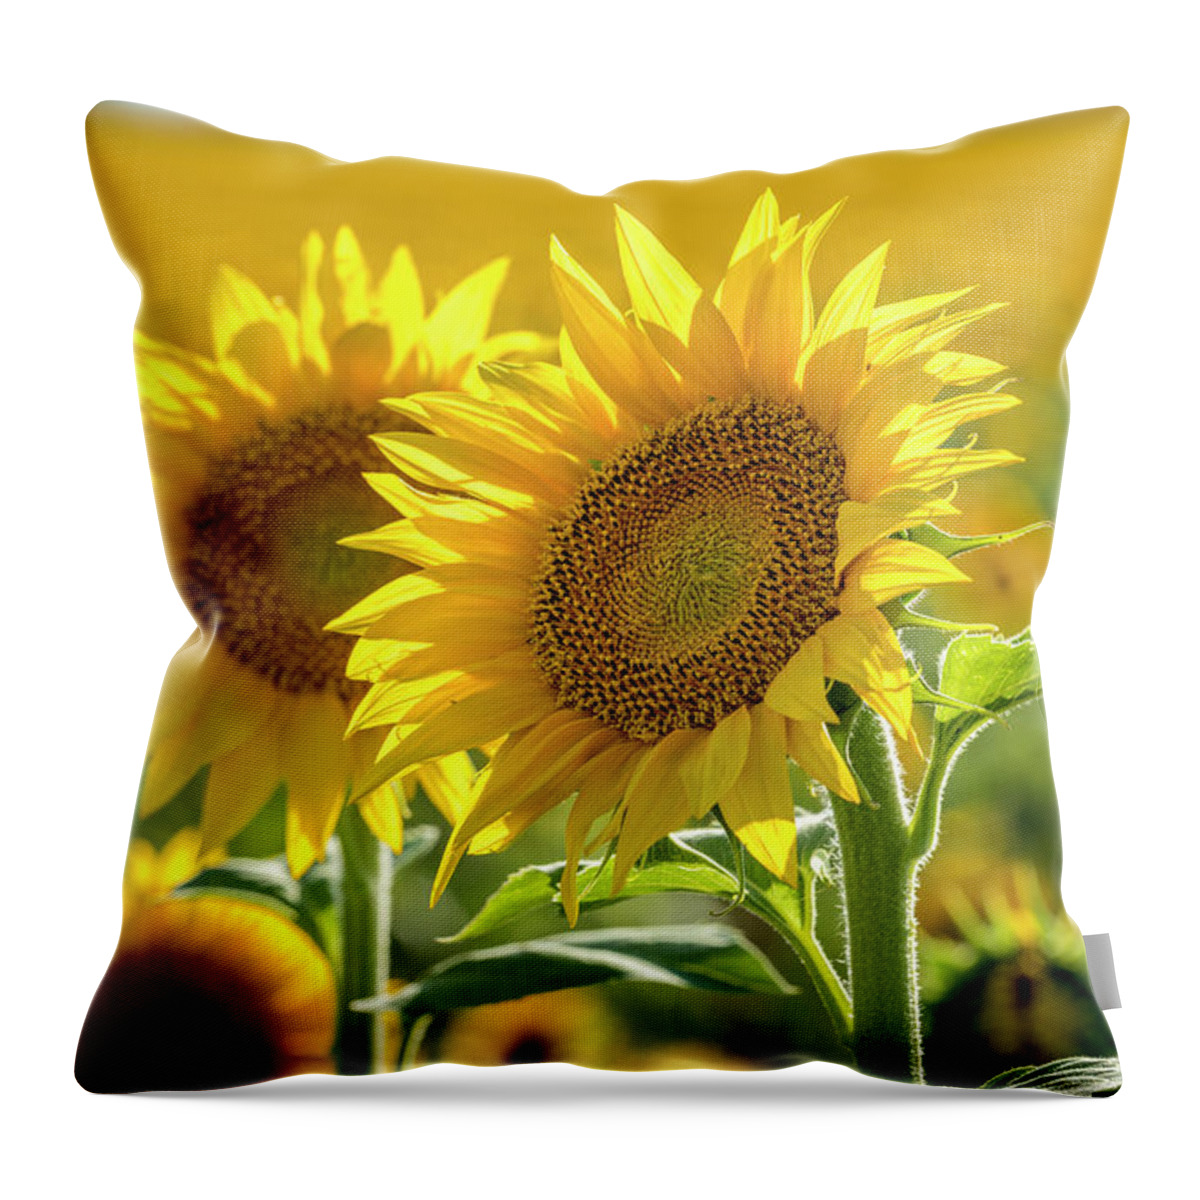 Colorado Throw Pillow featuring the photograph Sunny Afternoon Sunflower by Teri Virbickis